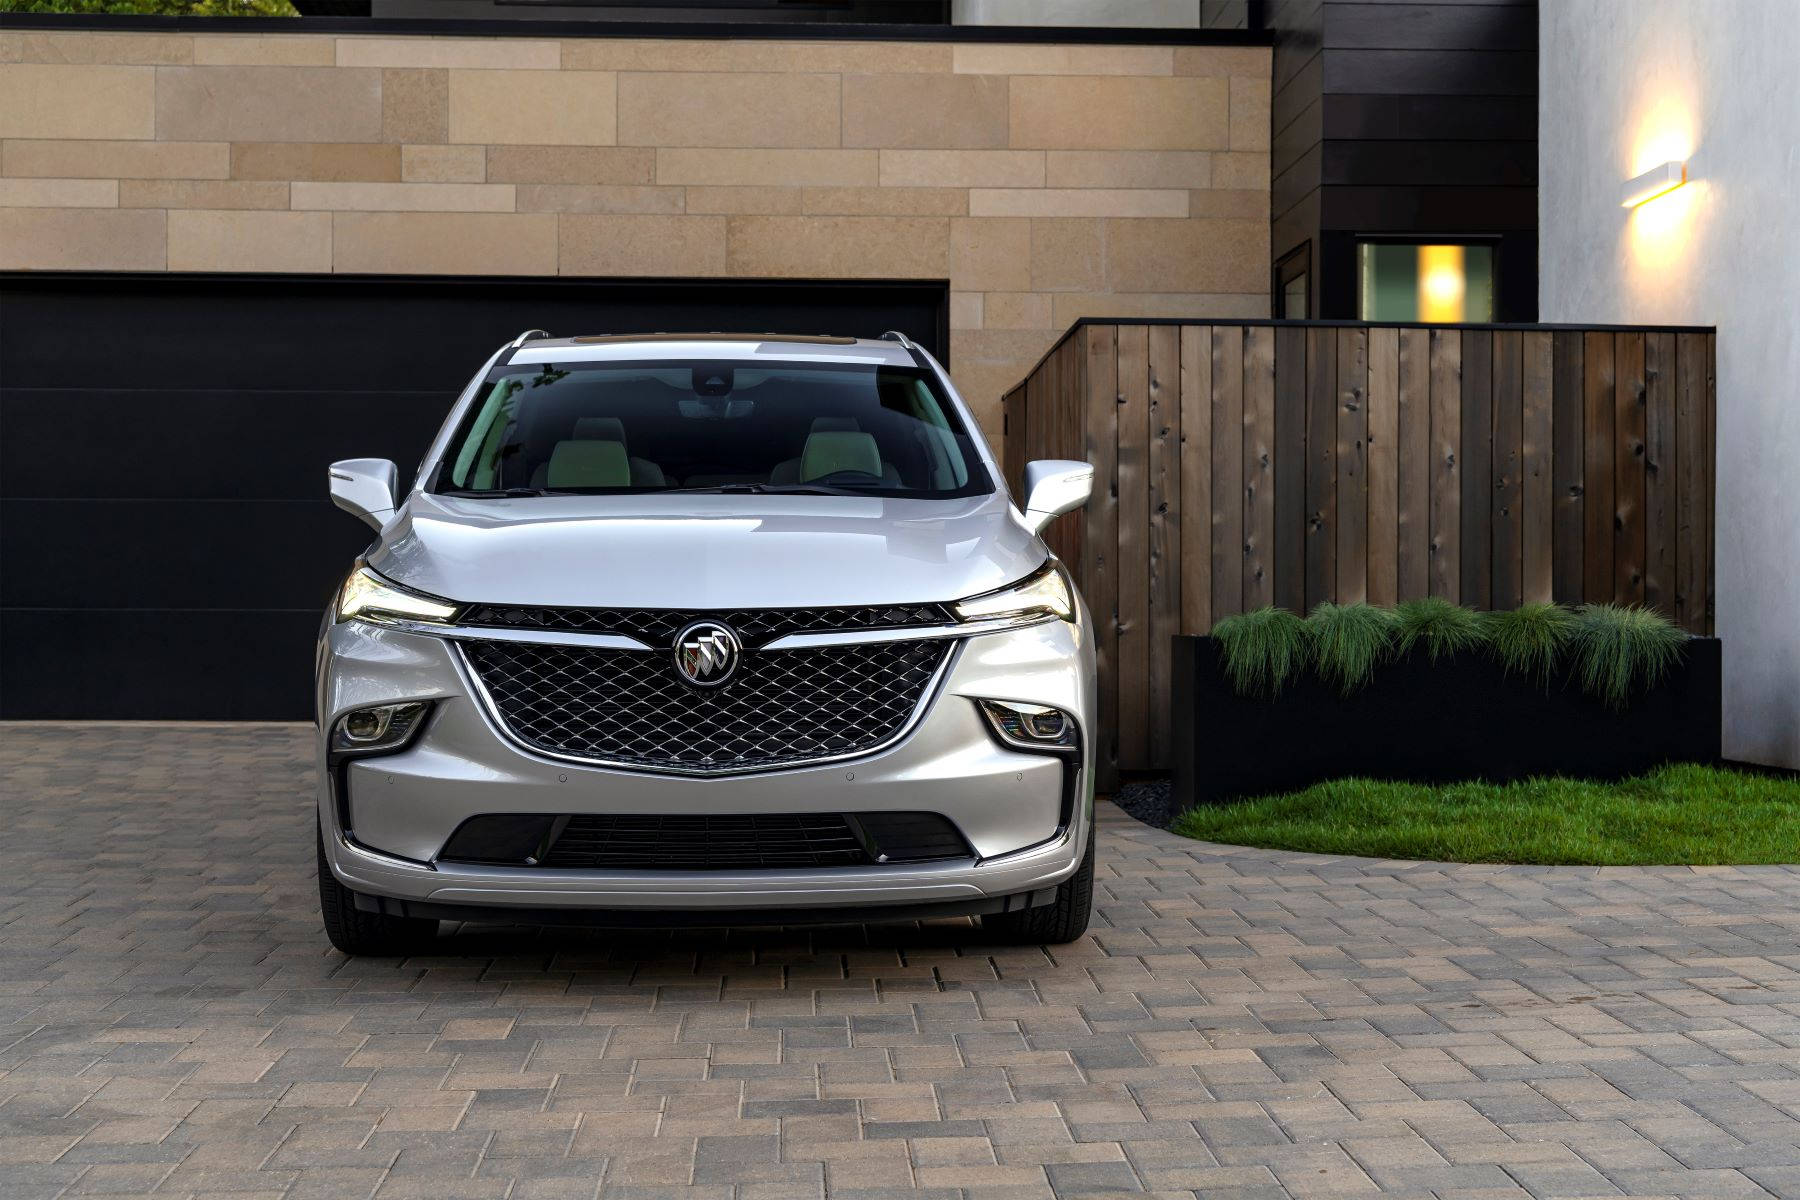 Buick Enclave At A Home Garage Background